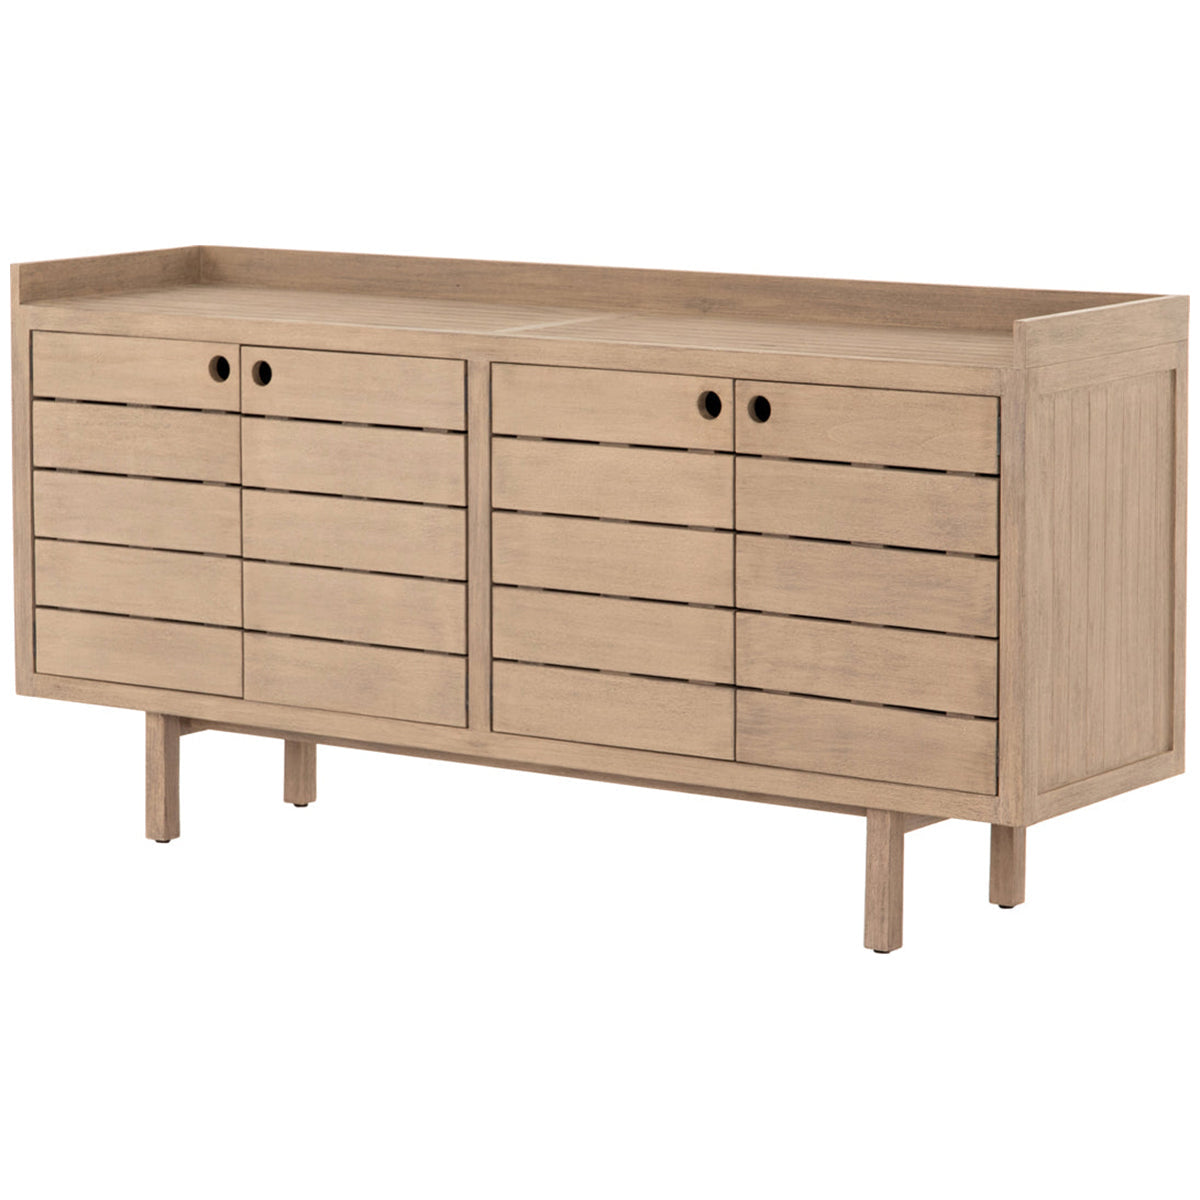 Four Hands Solano Lula Outdoor Sideboard